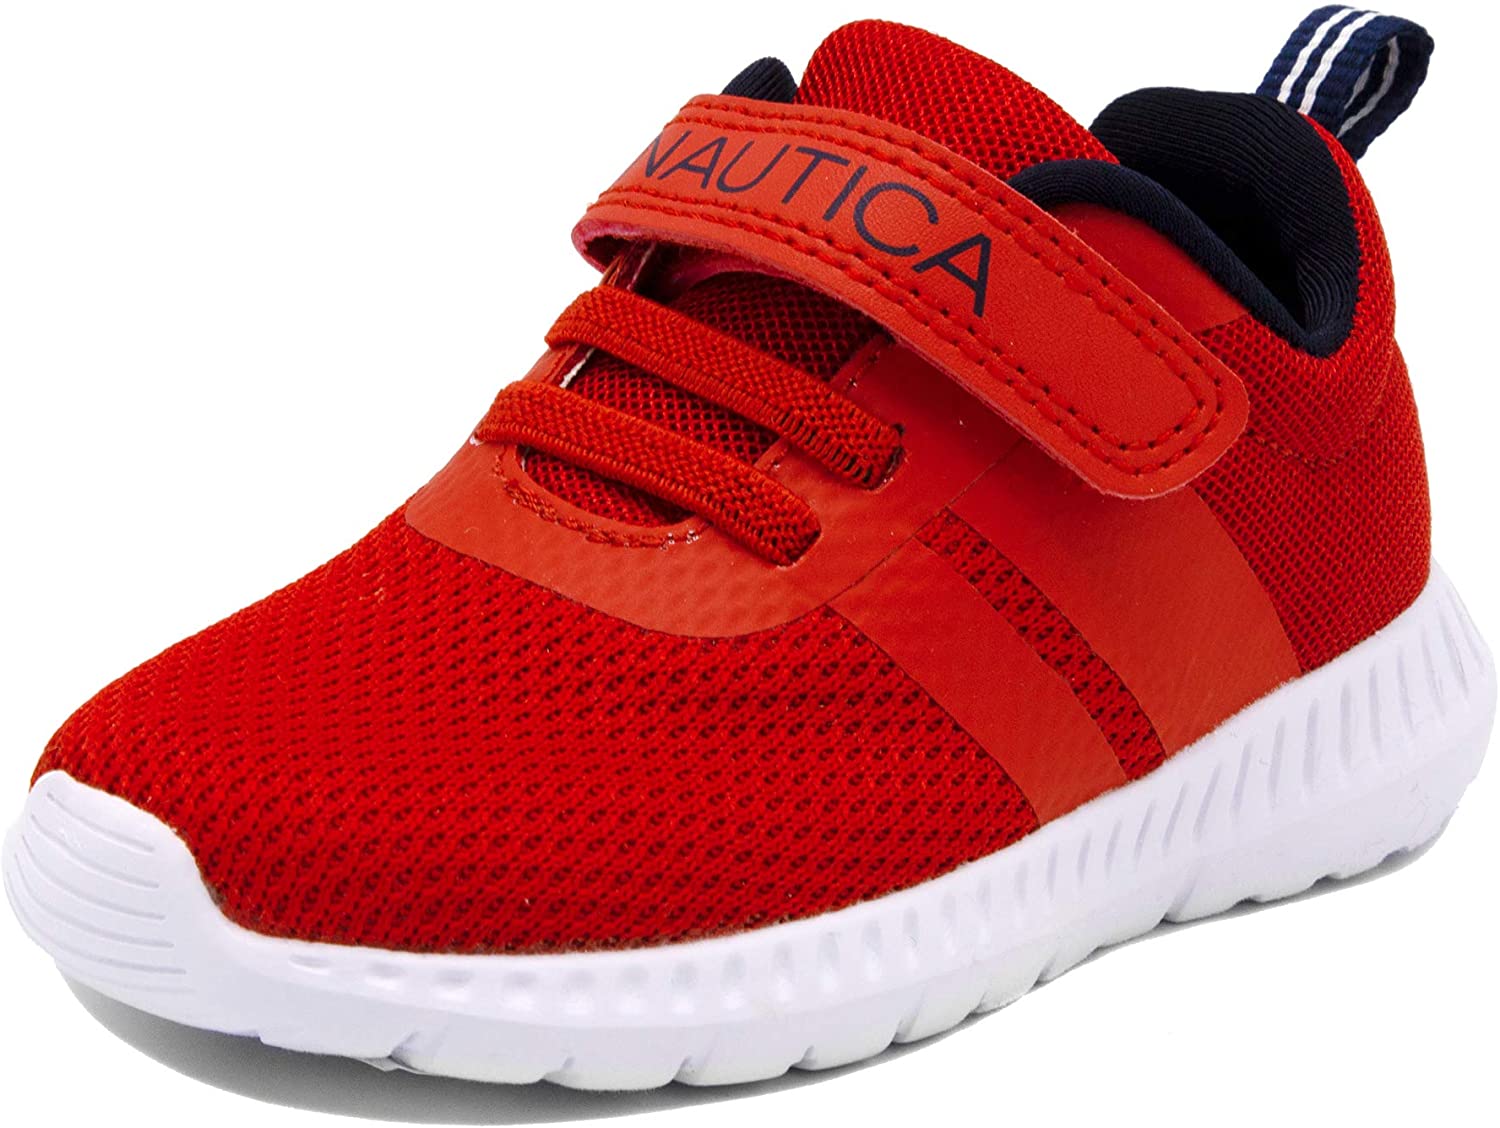 Nautica Kids Fashion Sneaker Athletic Running Shoe with One  Strap|Boys-Girls| (T